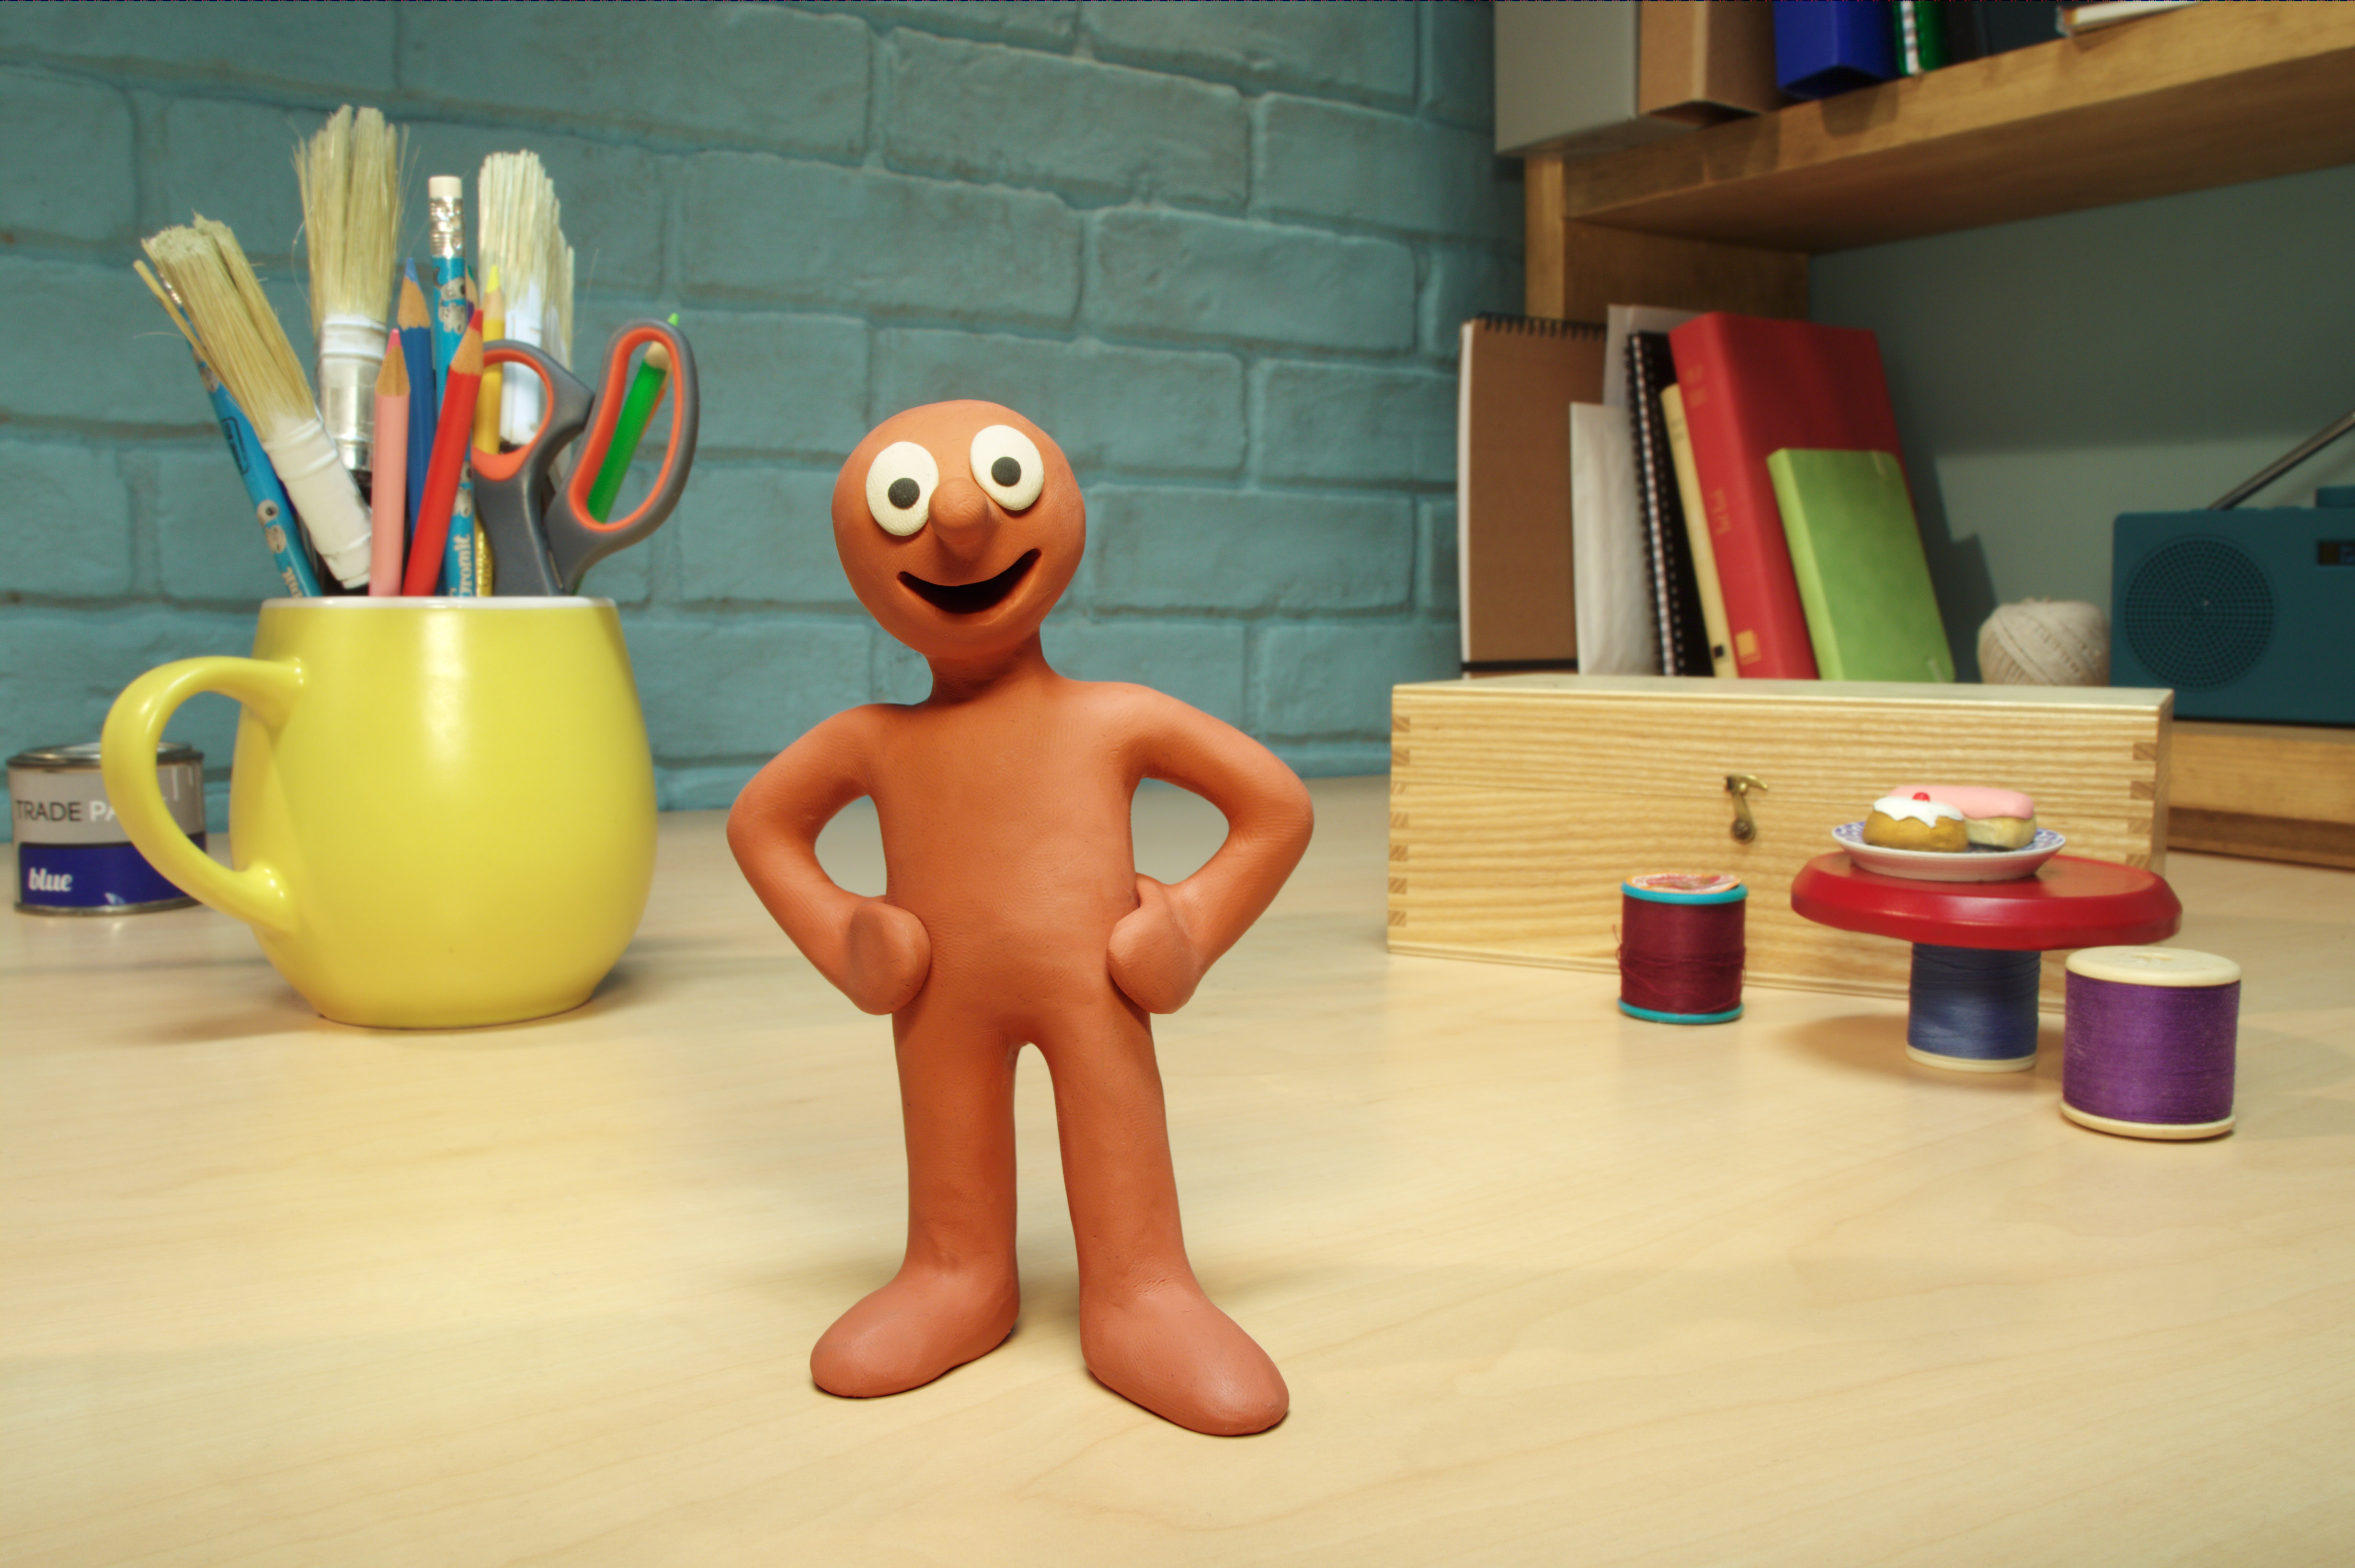 Northern Soul Exclusive: Morph talks to Northern Soul